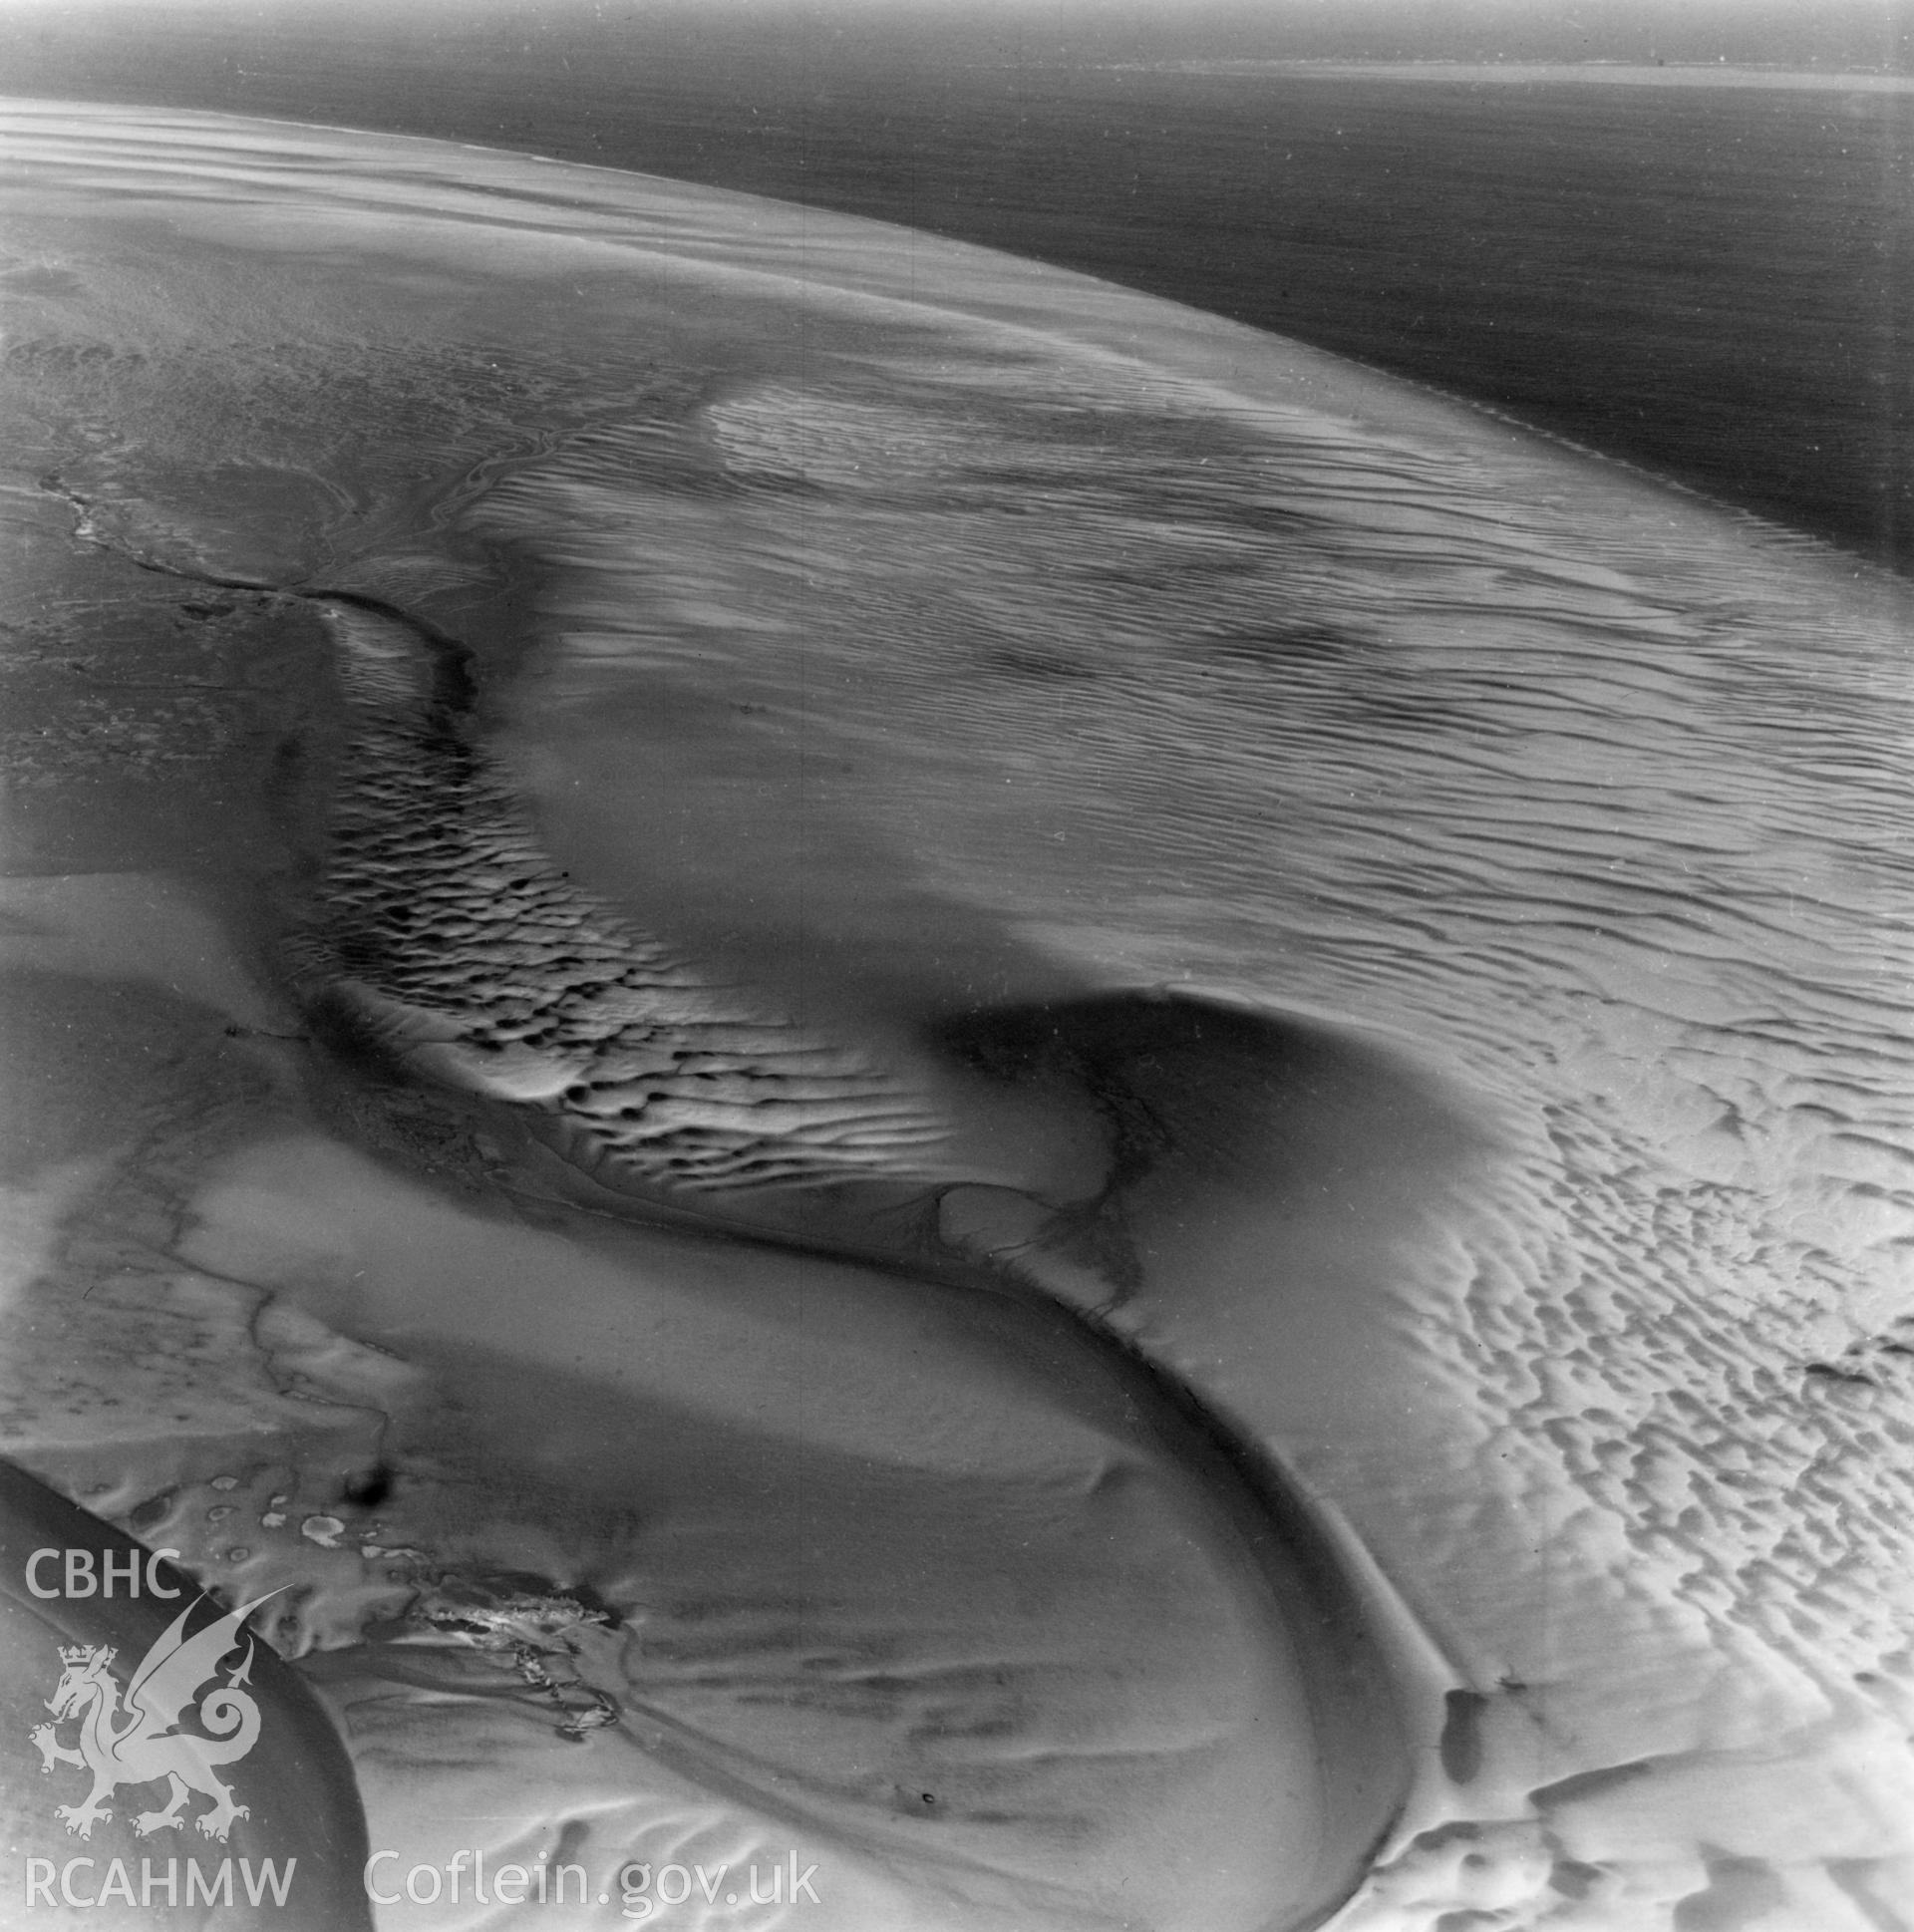 View of mudflats at Point of Ayr. Oblique aerial photograph, 5?" cut roll film.